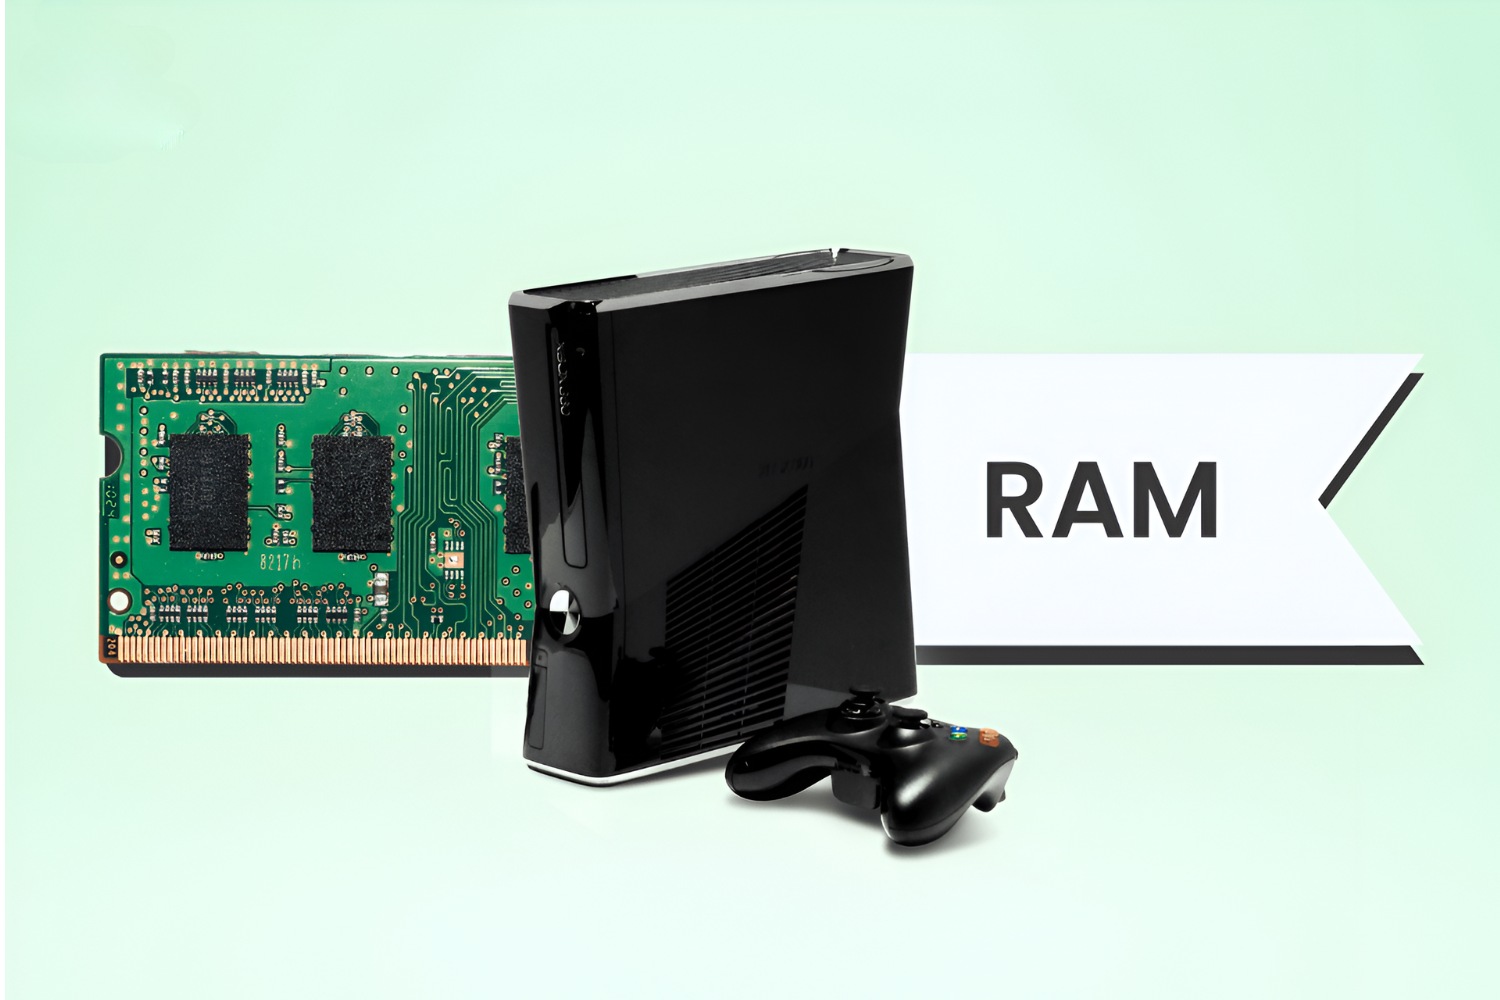 How Much RAM Does An Xbox 360 Have